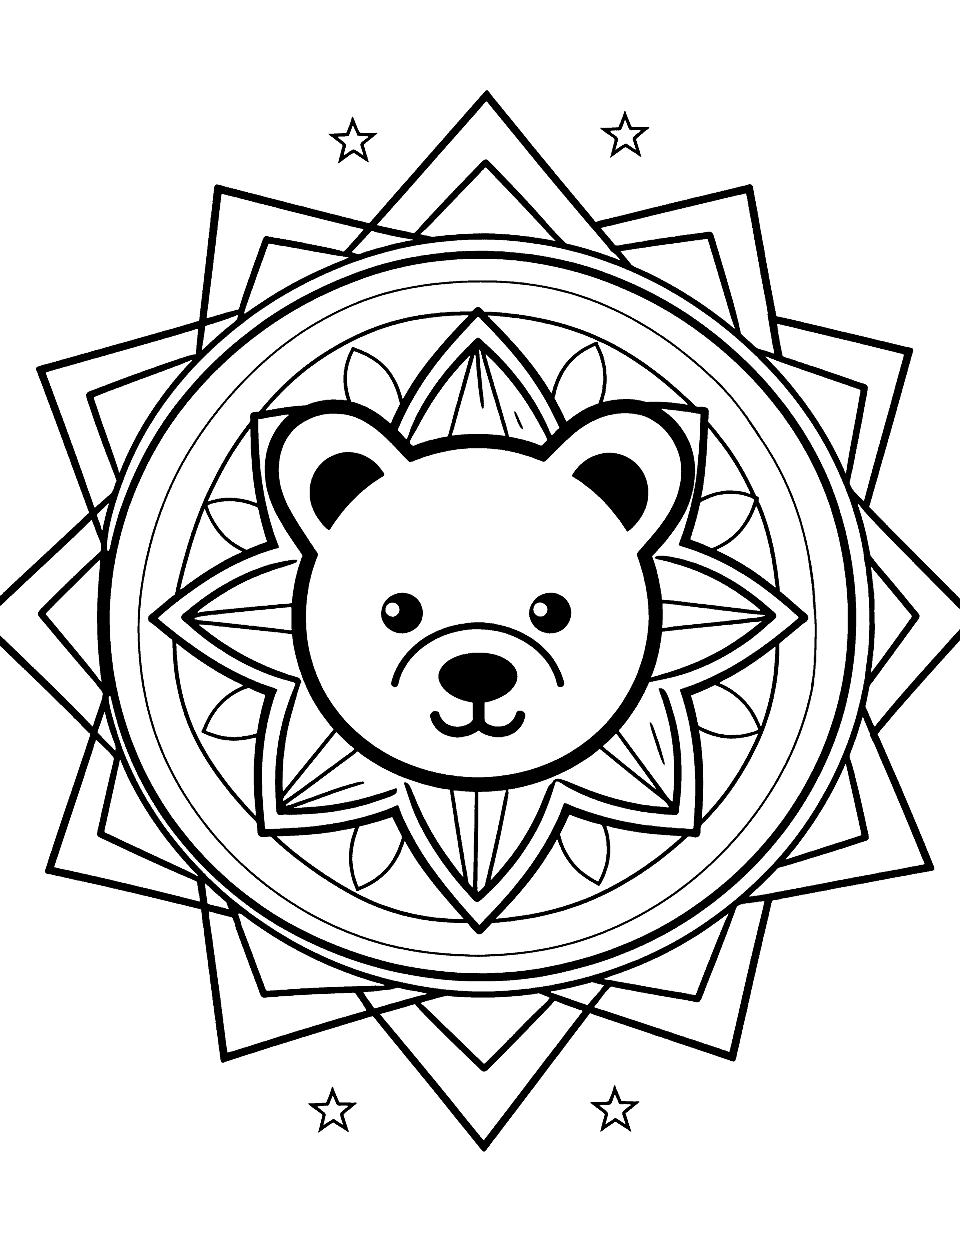 Cuddly Teddy Mandala Coloring Page - A cute and easy mandala with a teddy bear at the center, surrounded by stars.